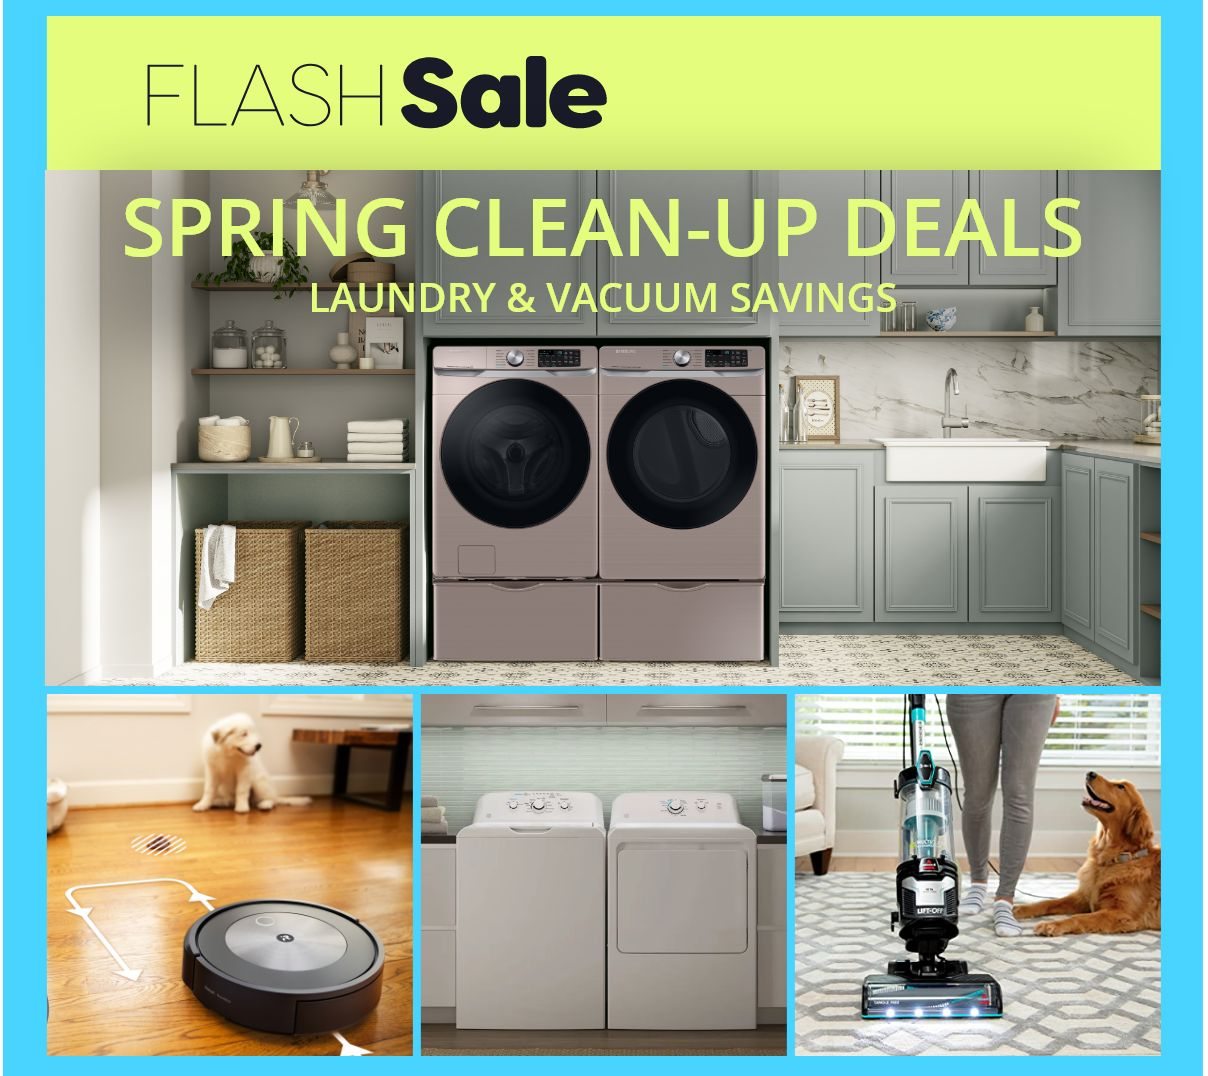 Spring Clean-up deals on Laundry & Vacuums